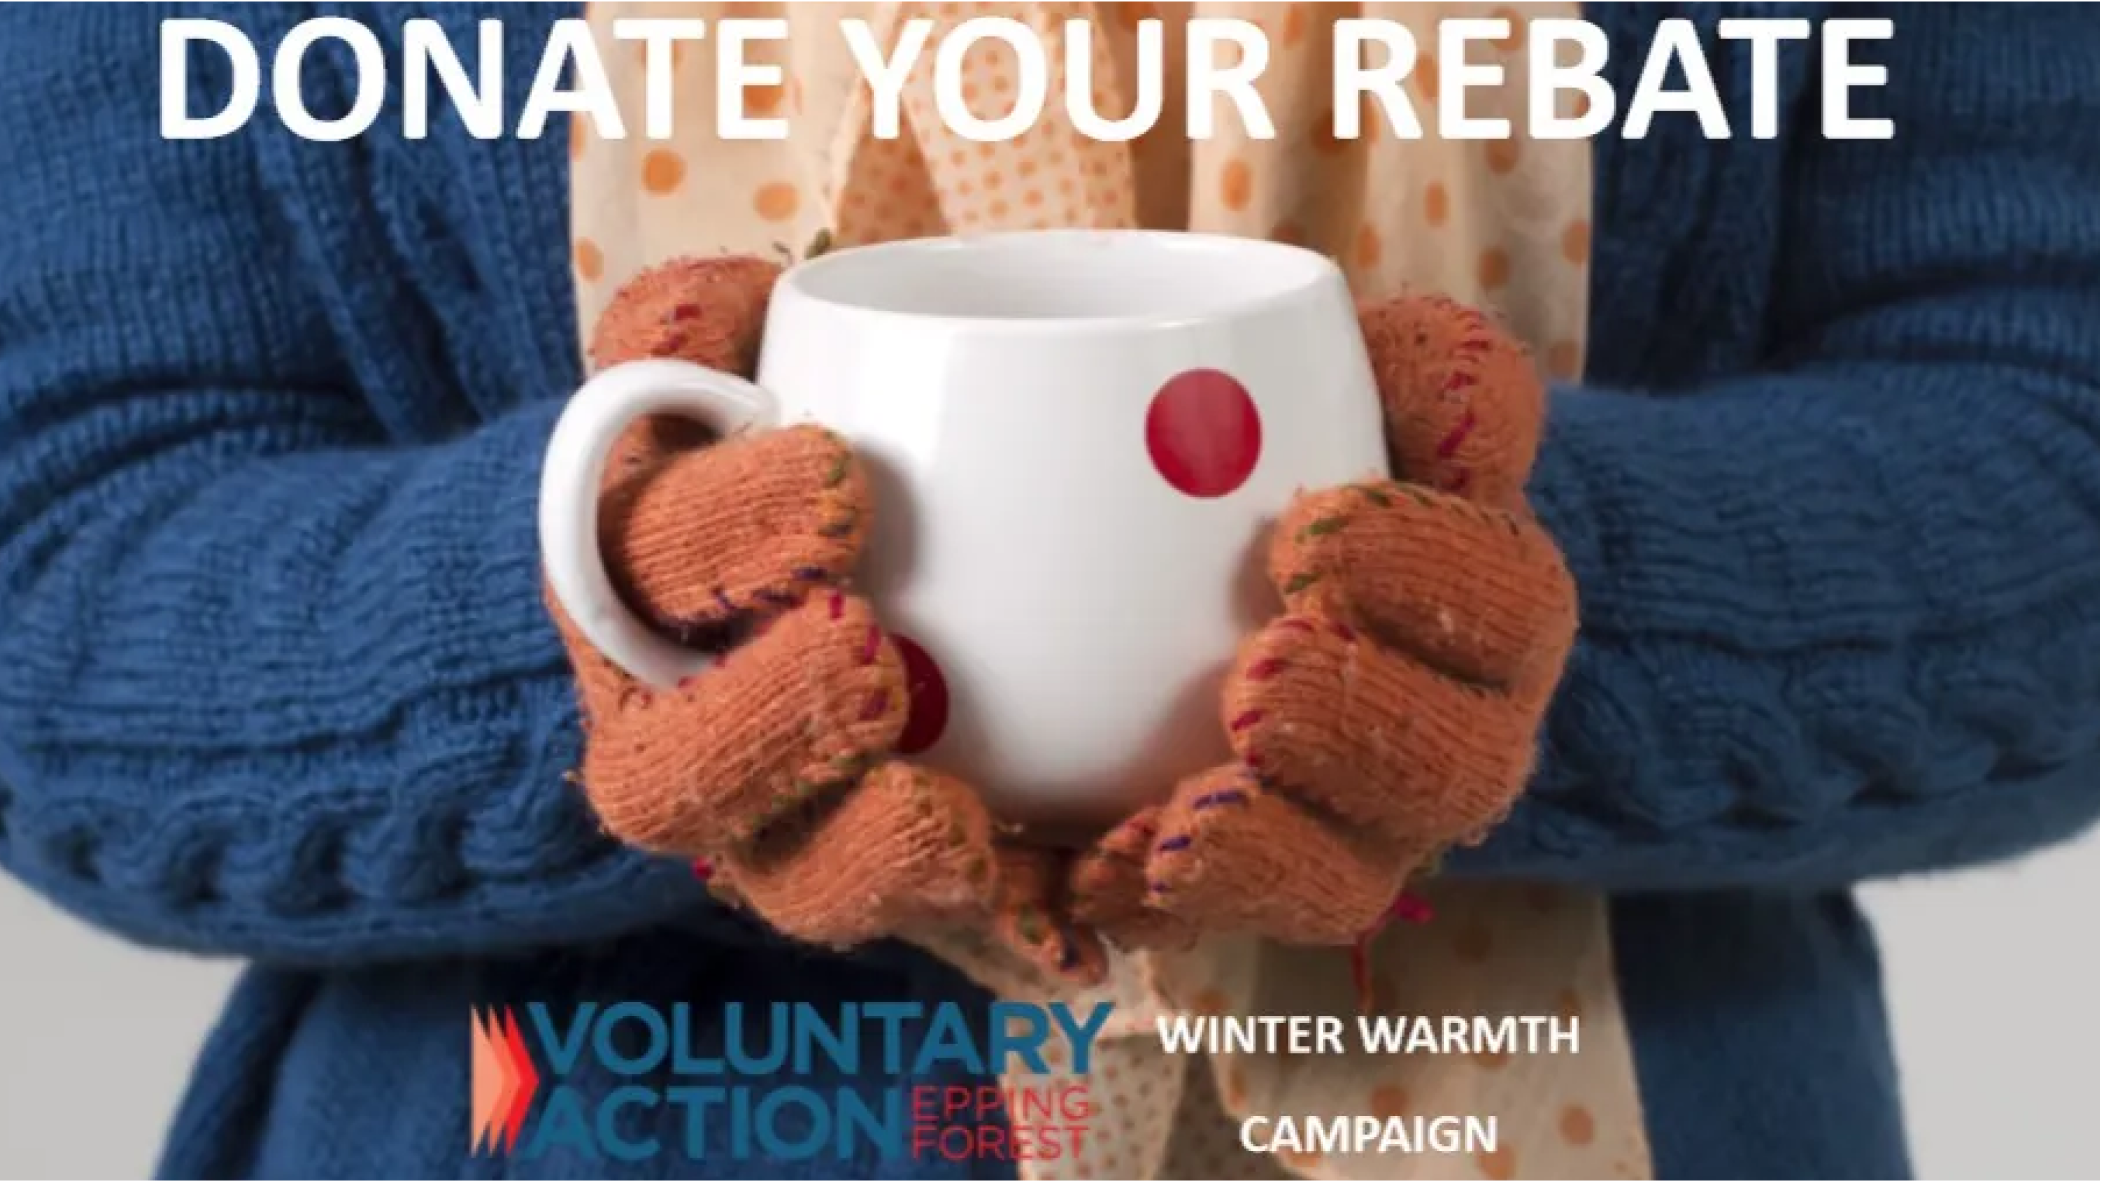 Winter energy donation scheme - donating your energy rebate to those in need